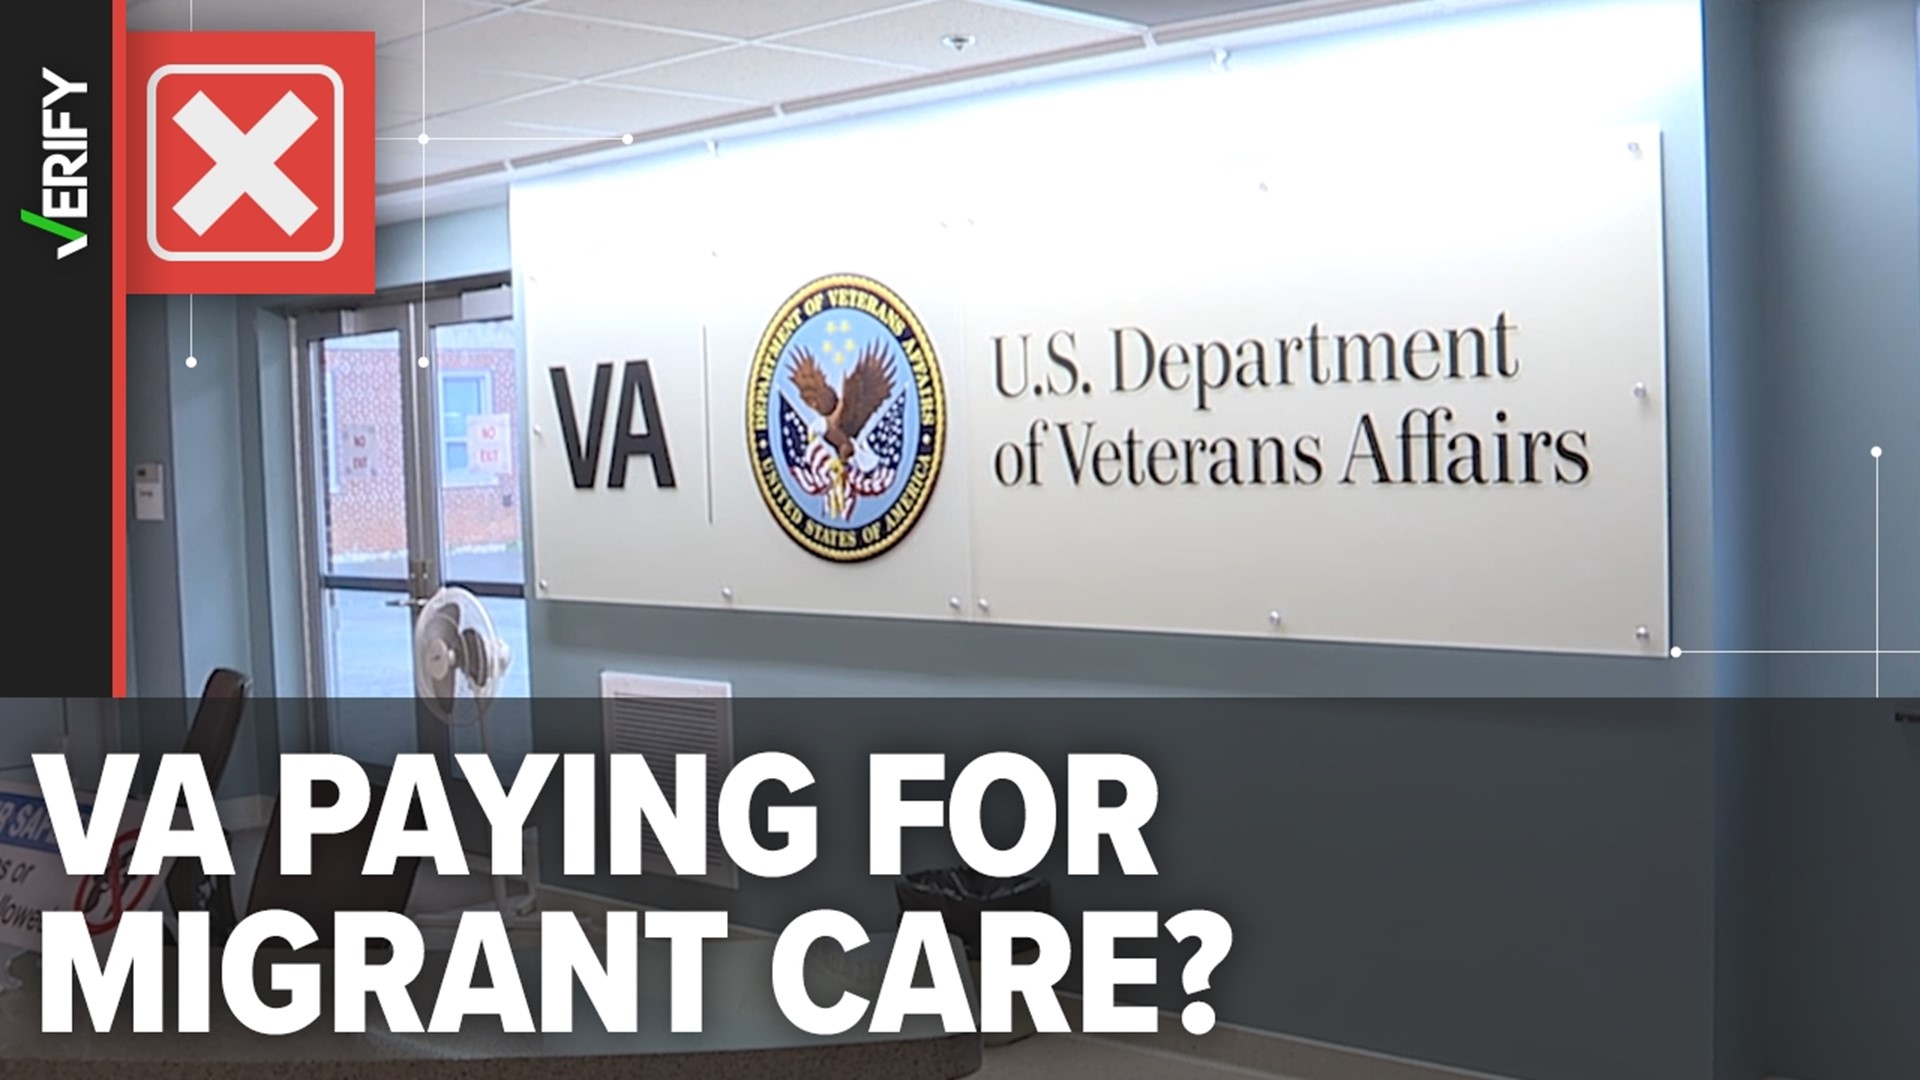 Critics of President Biden claim his Department of Veterans Affairs is putting immigrants ahead of vets. Here’s what’s actually happening.